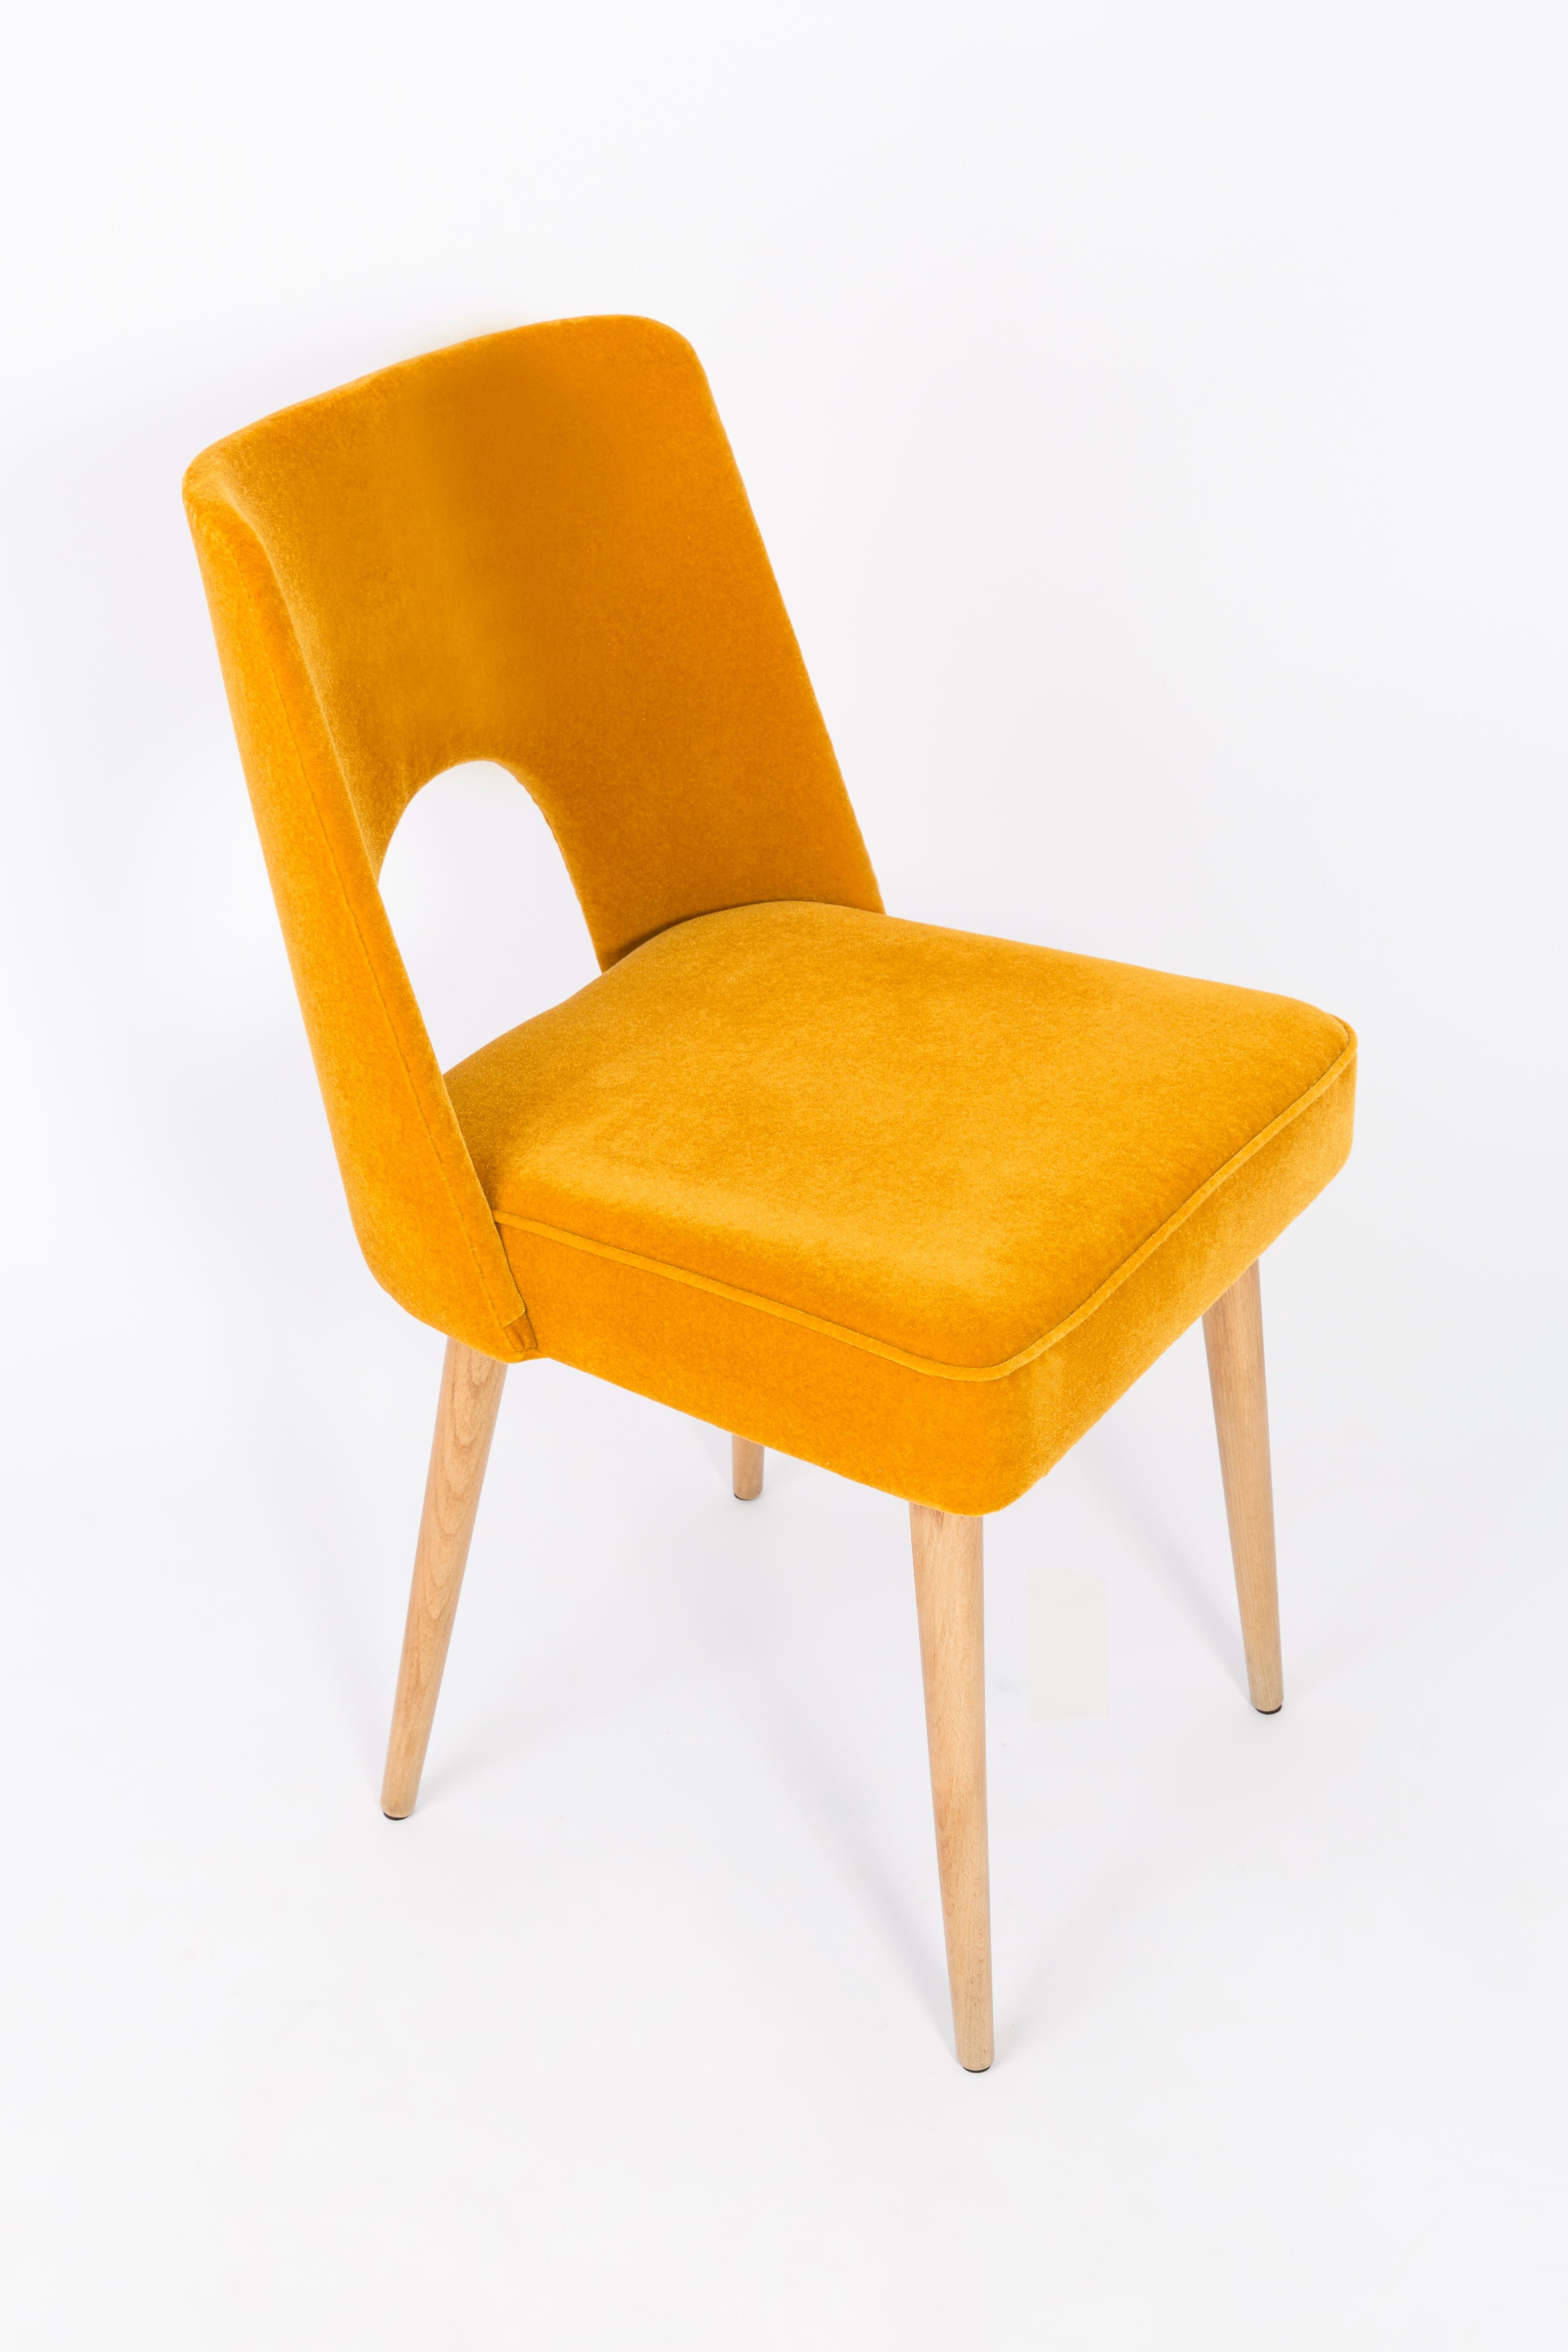 20th Century Set of Two Mustard Yellow Velvet 'Shell' Chairs, 1960s For Sale